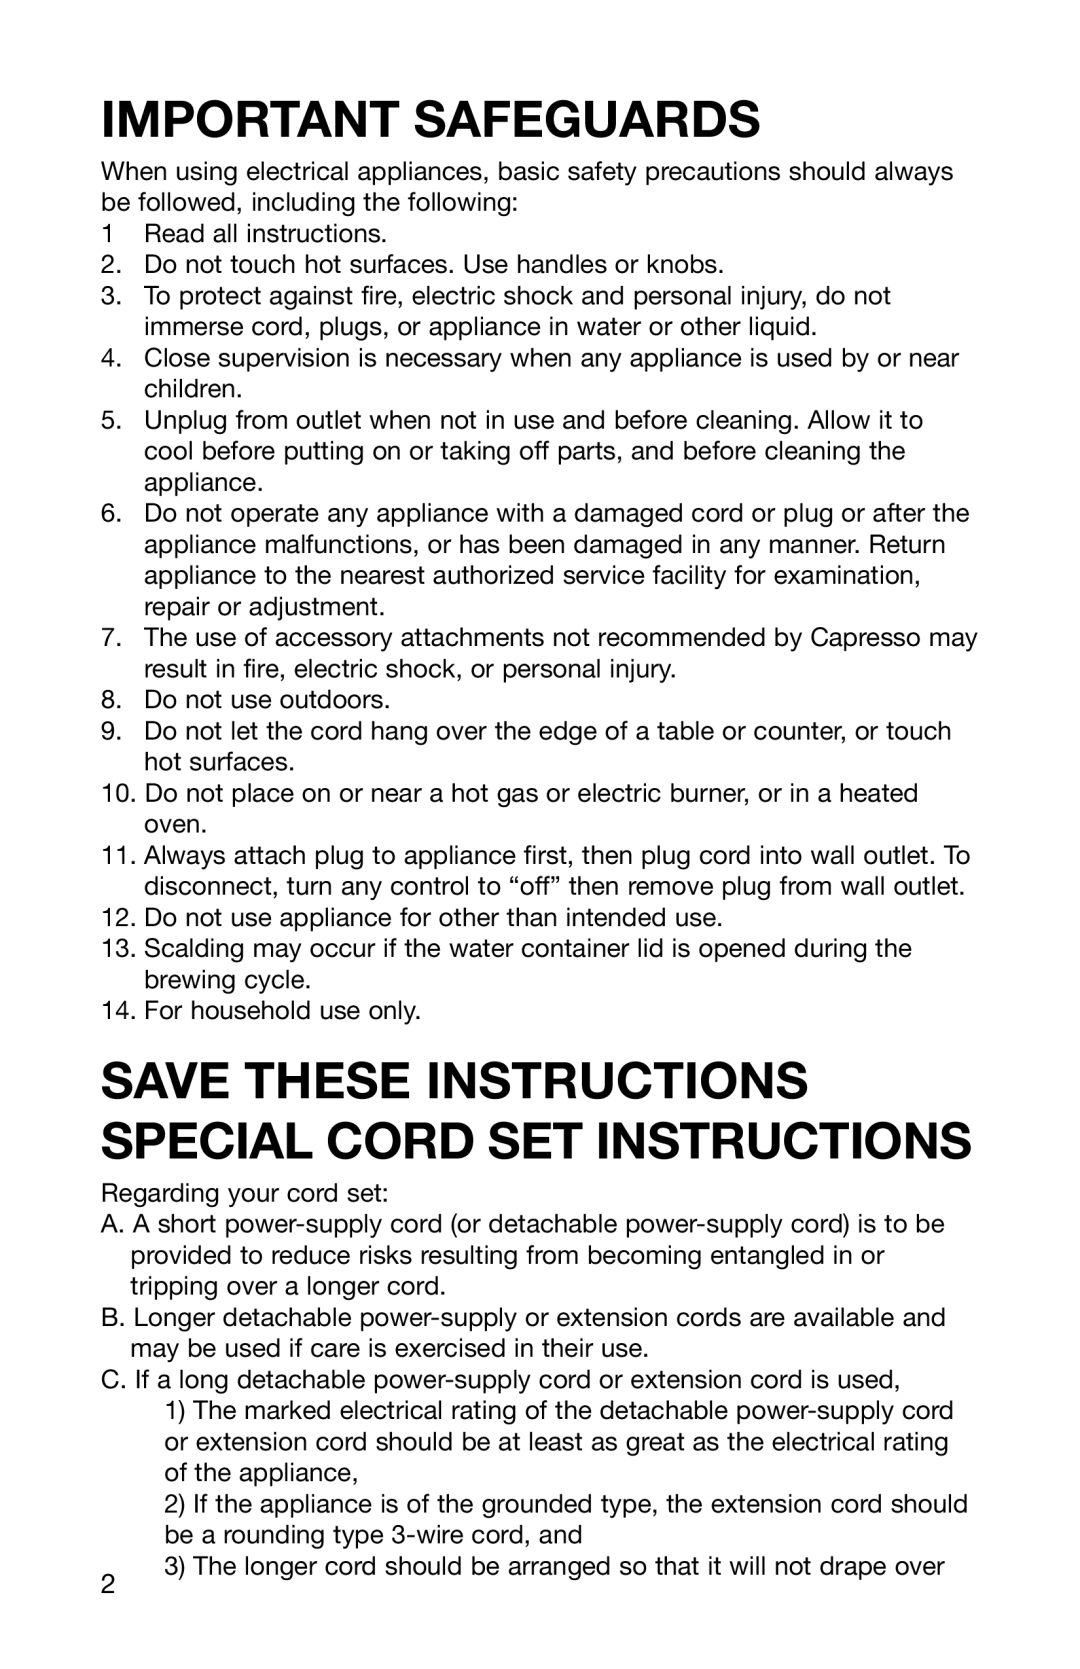 Capresso 484 operating instructions Important Safeguards, Save These Instructions Special Cord Set Instructions 